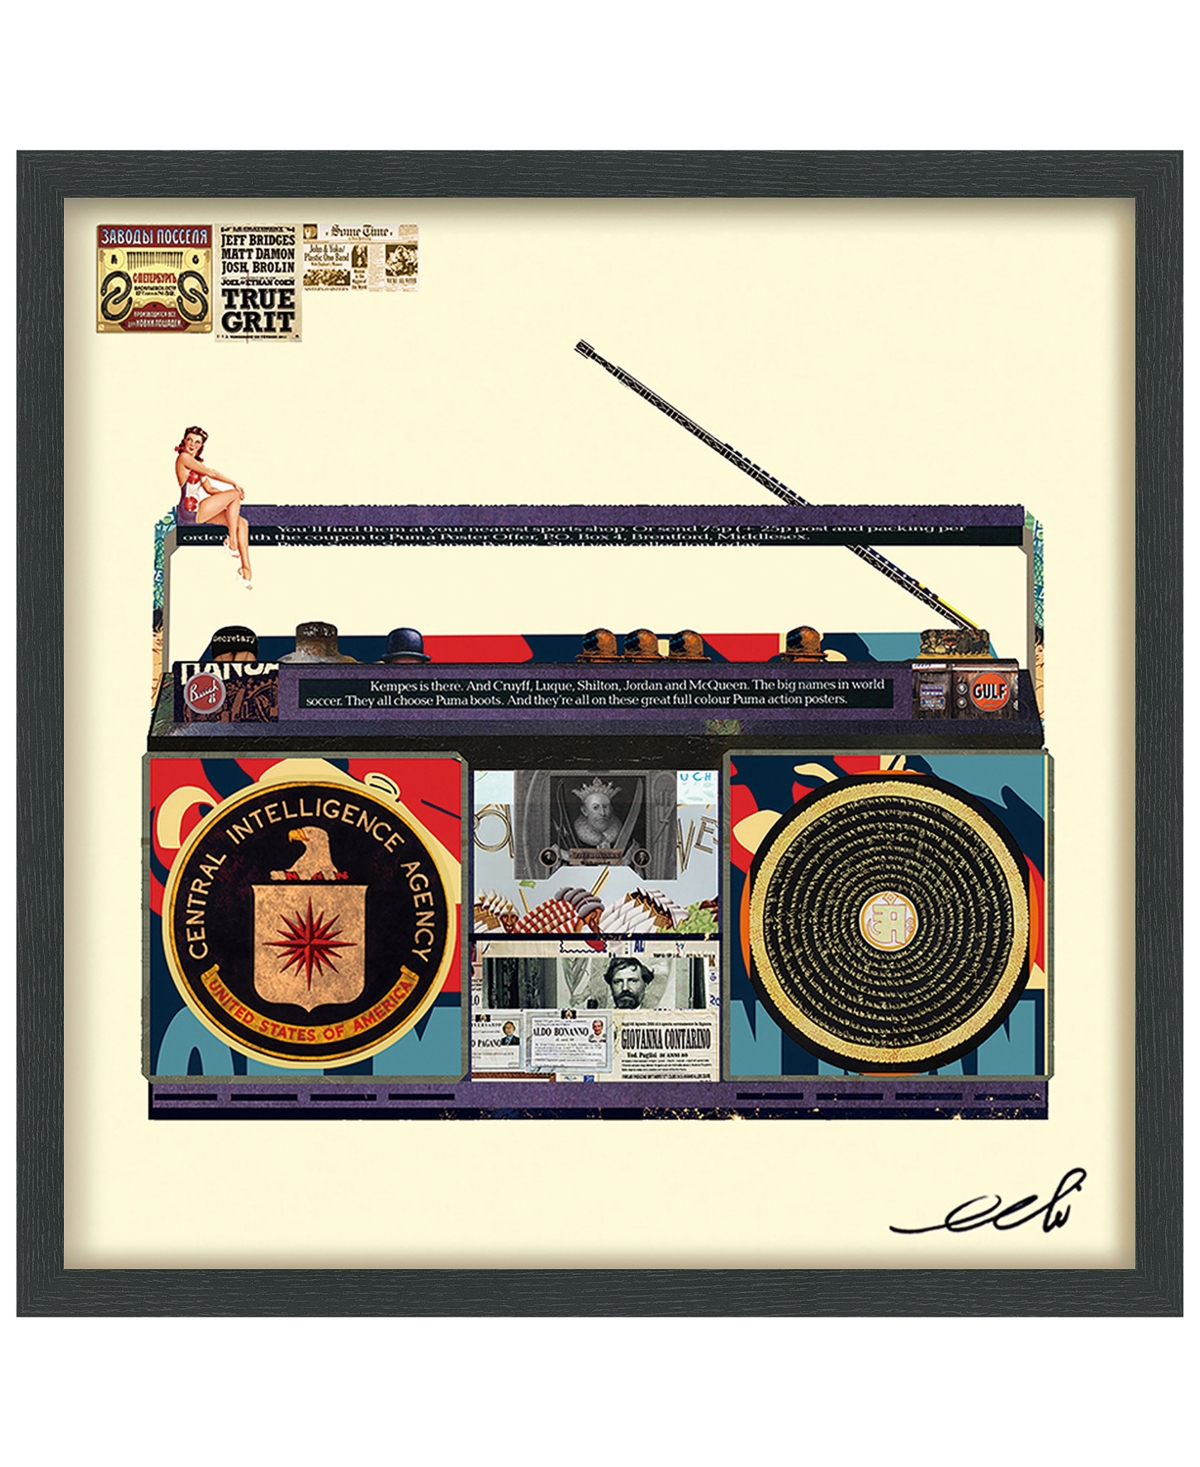 Empire Art Direct "cia Boombox" Hand-made Dimensional Art Collage, Under Glass, Encased On A Black Shadow Box Frame, 2 In Multi-color